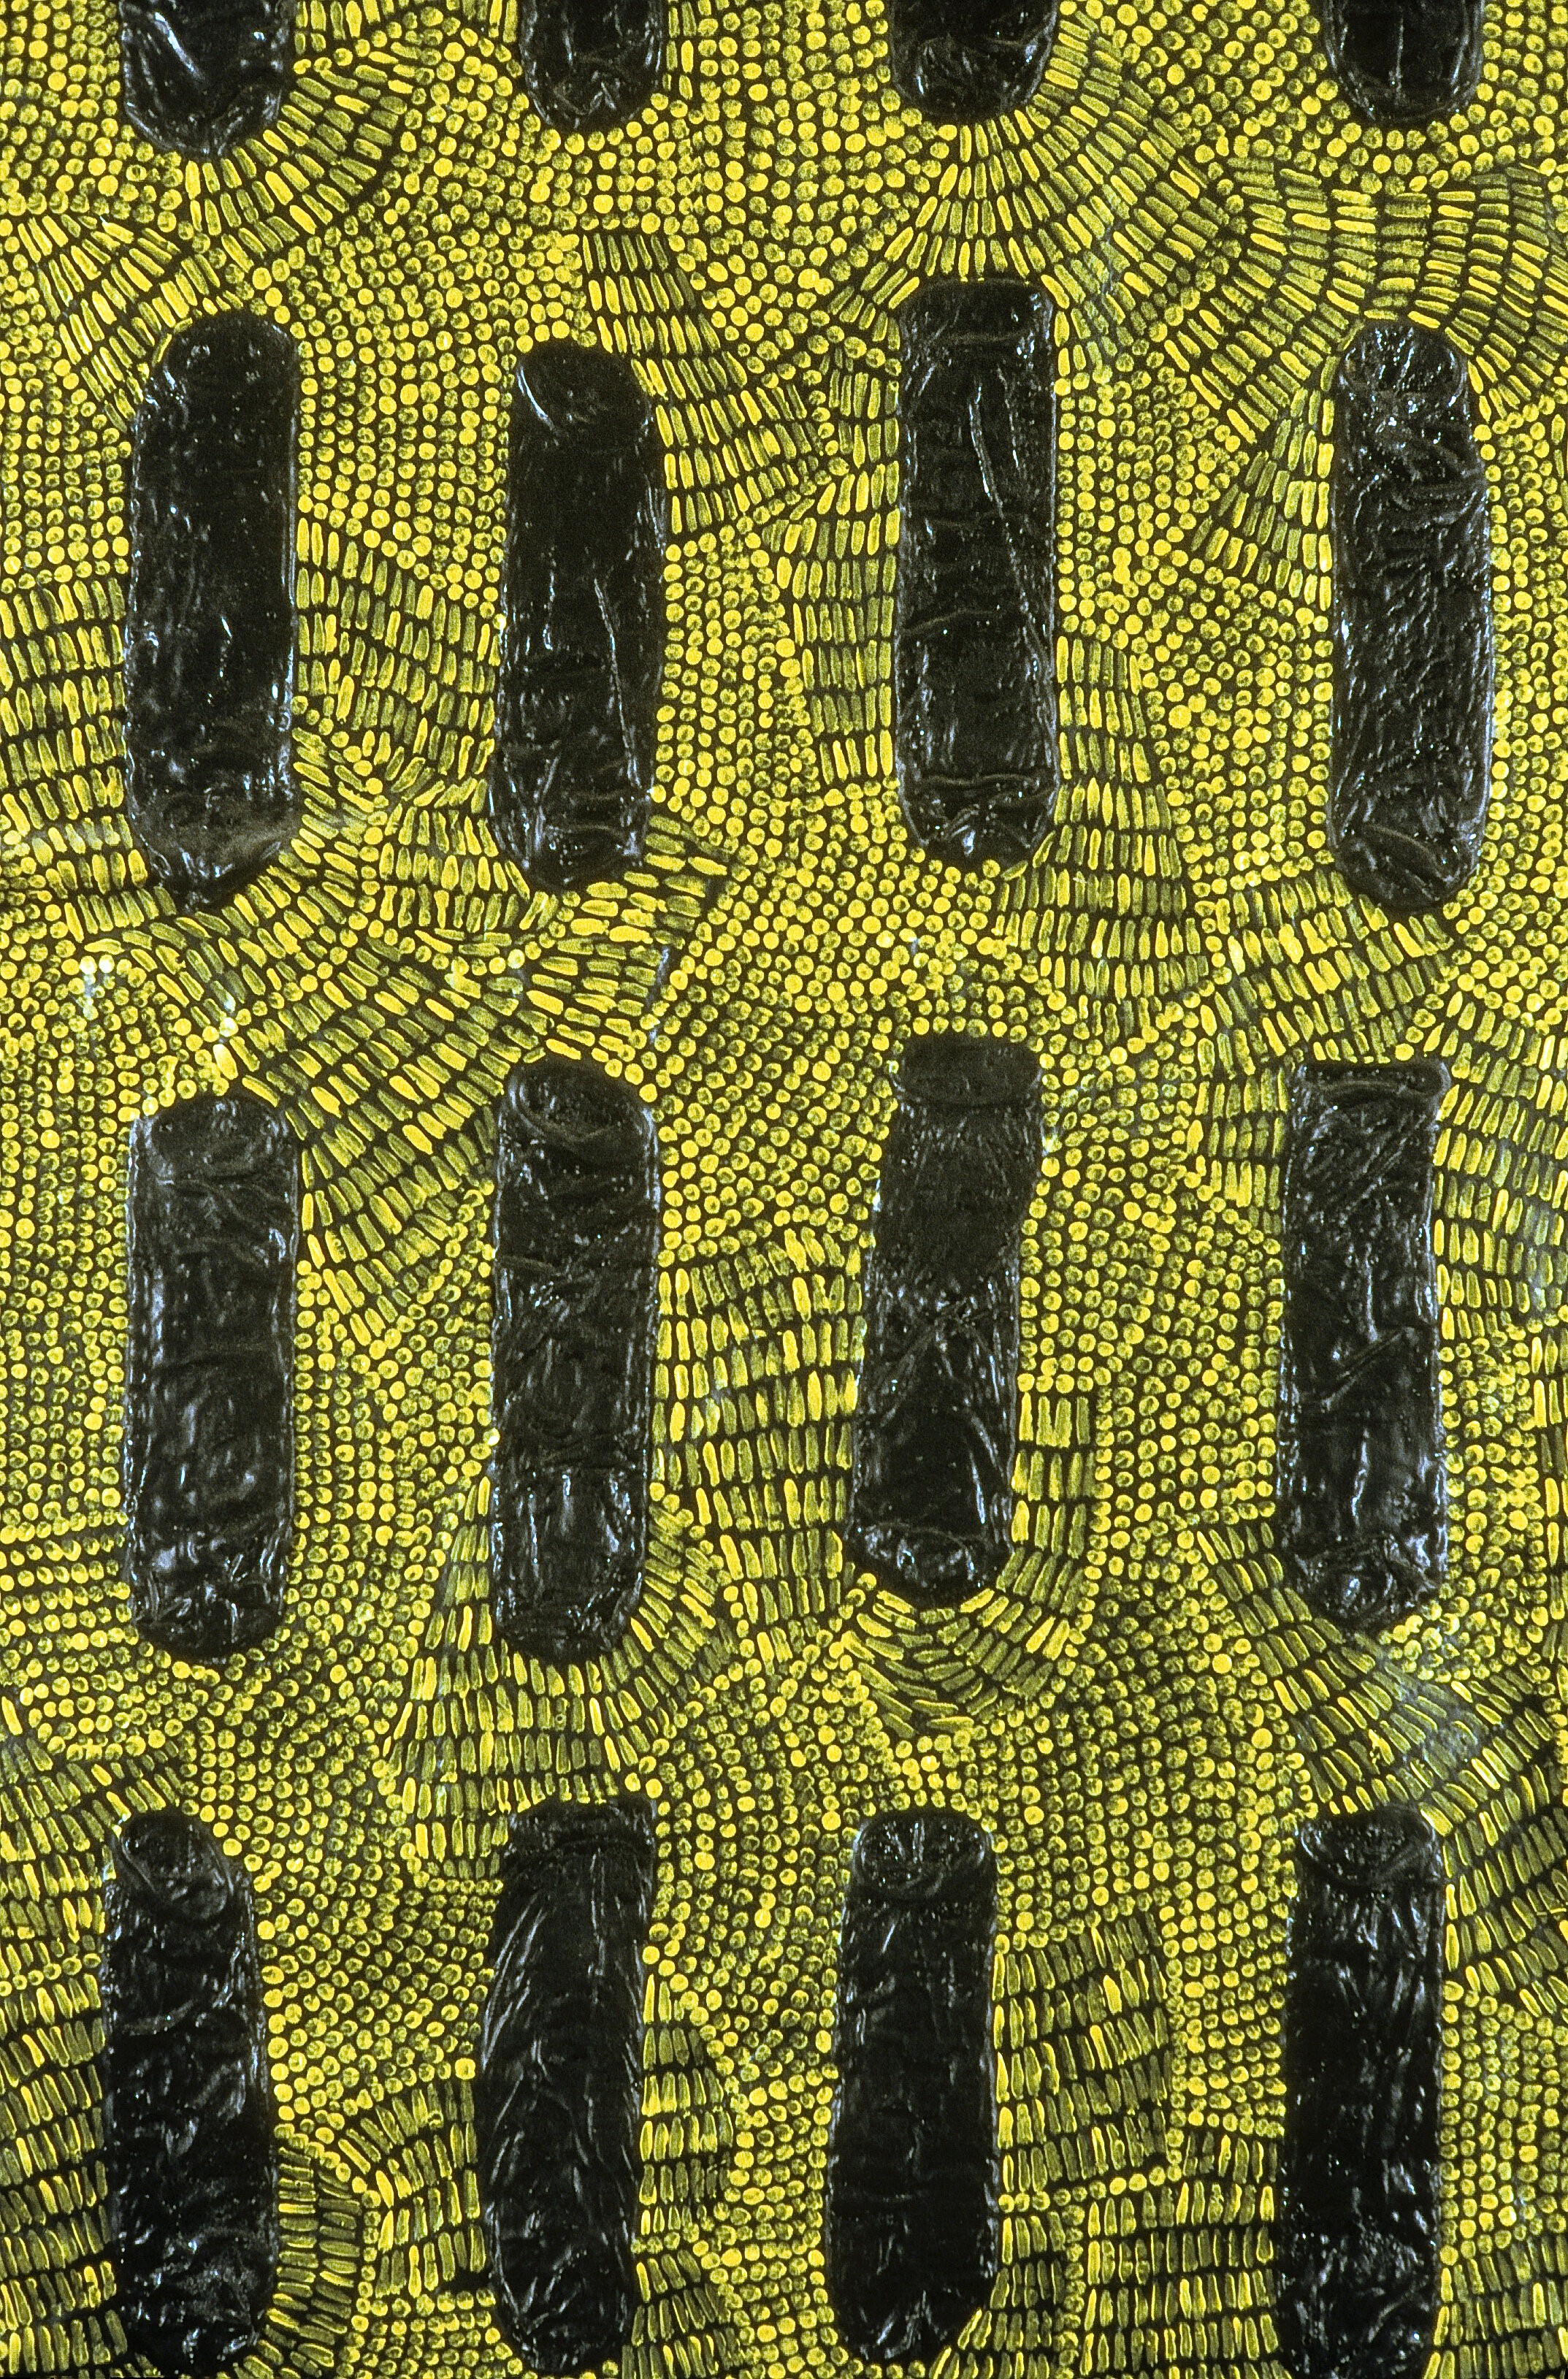   Yellow Condom Relief Piece  (Detail), 1971, gacoflex, condoms, cheesecloth, acrylic, neoprene rubber, rubber latex, 75 1/2 x 61 inches   